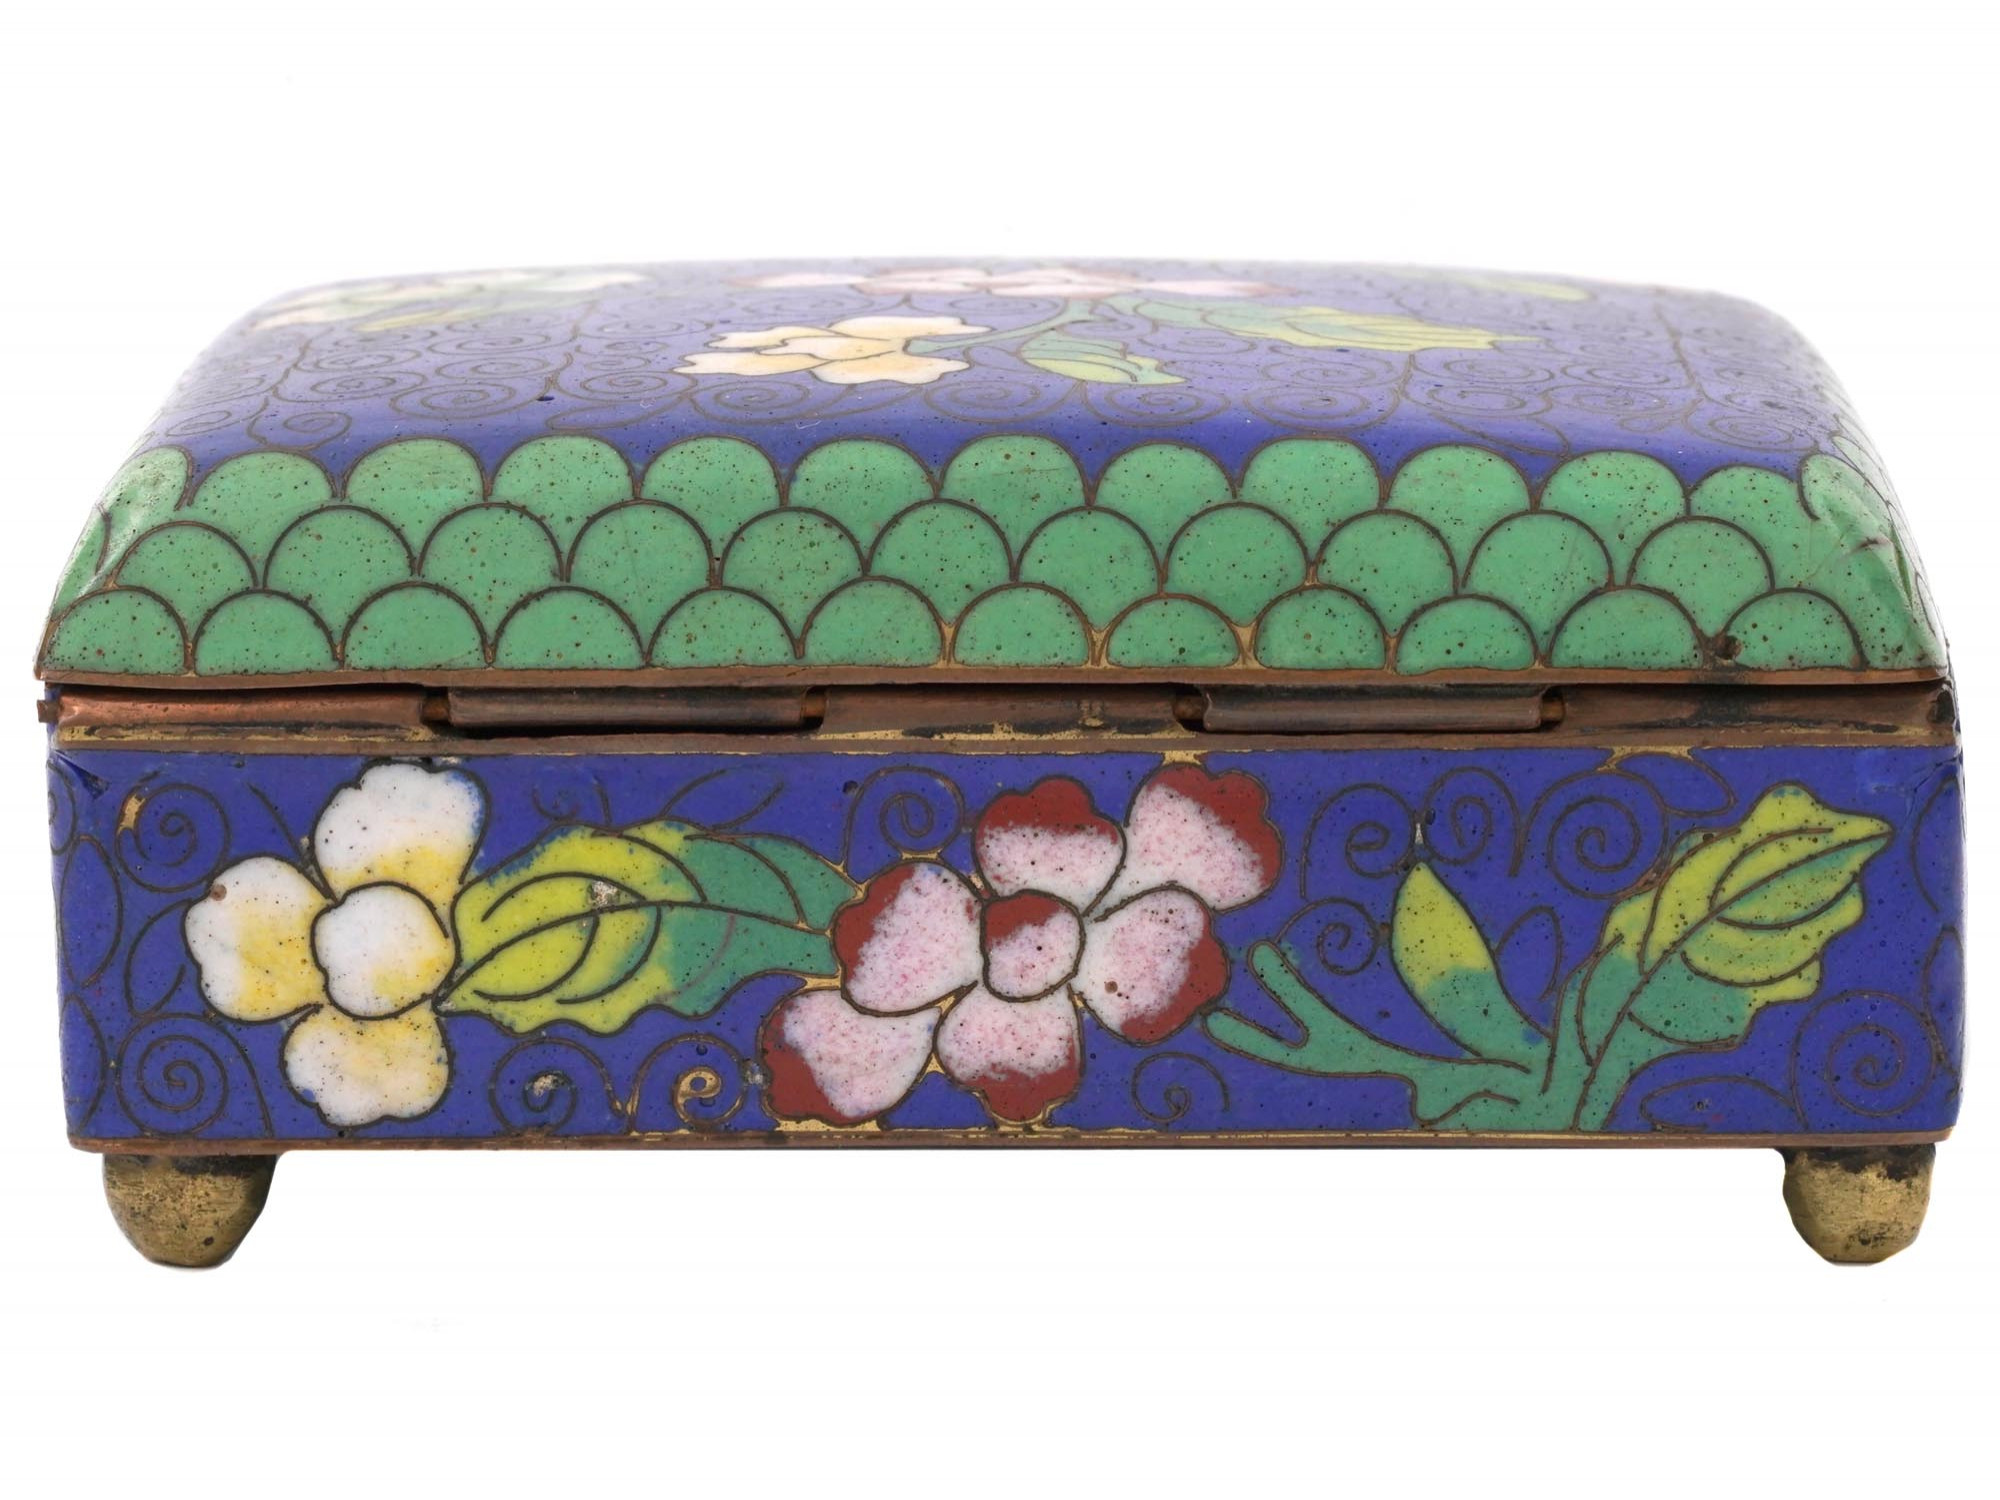 ANTIQUE CHINESE COVERED FLORAL CLOISONNE ENAMEL BOX PIC-4